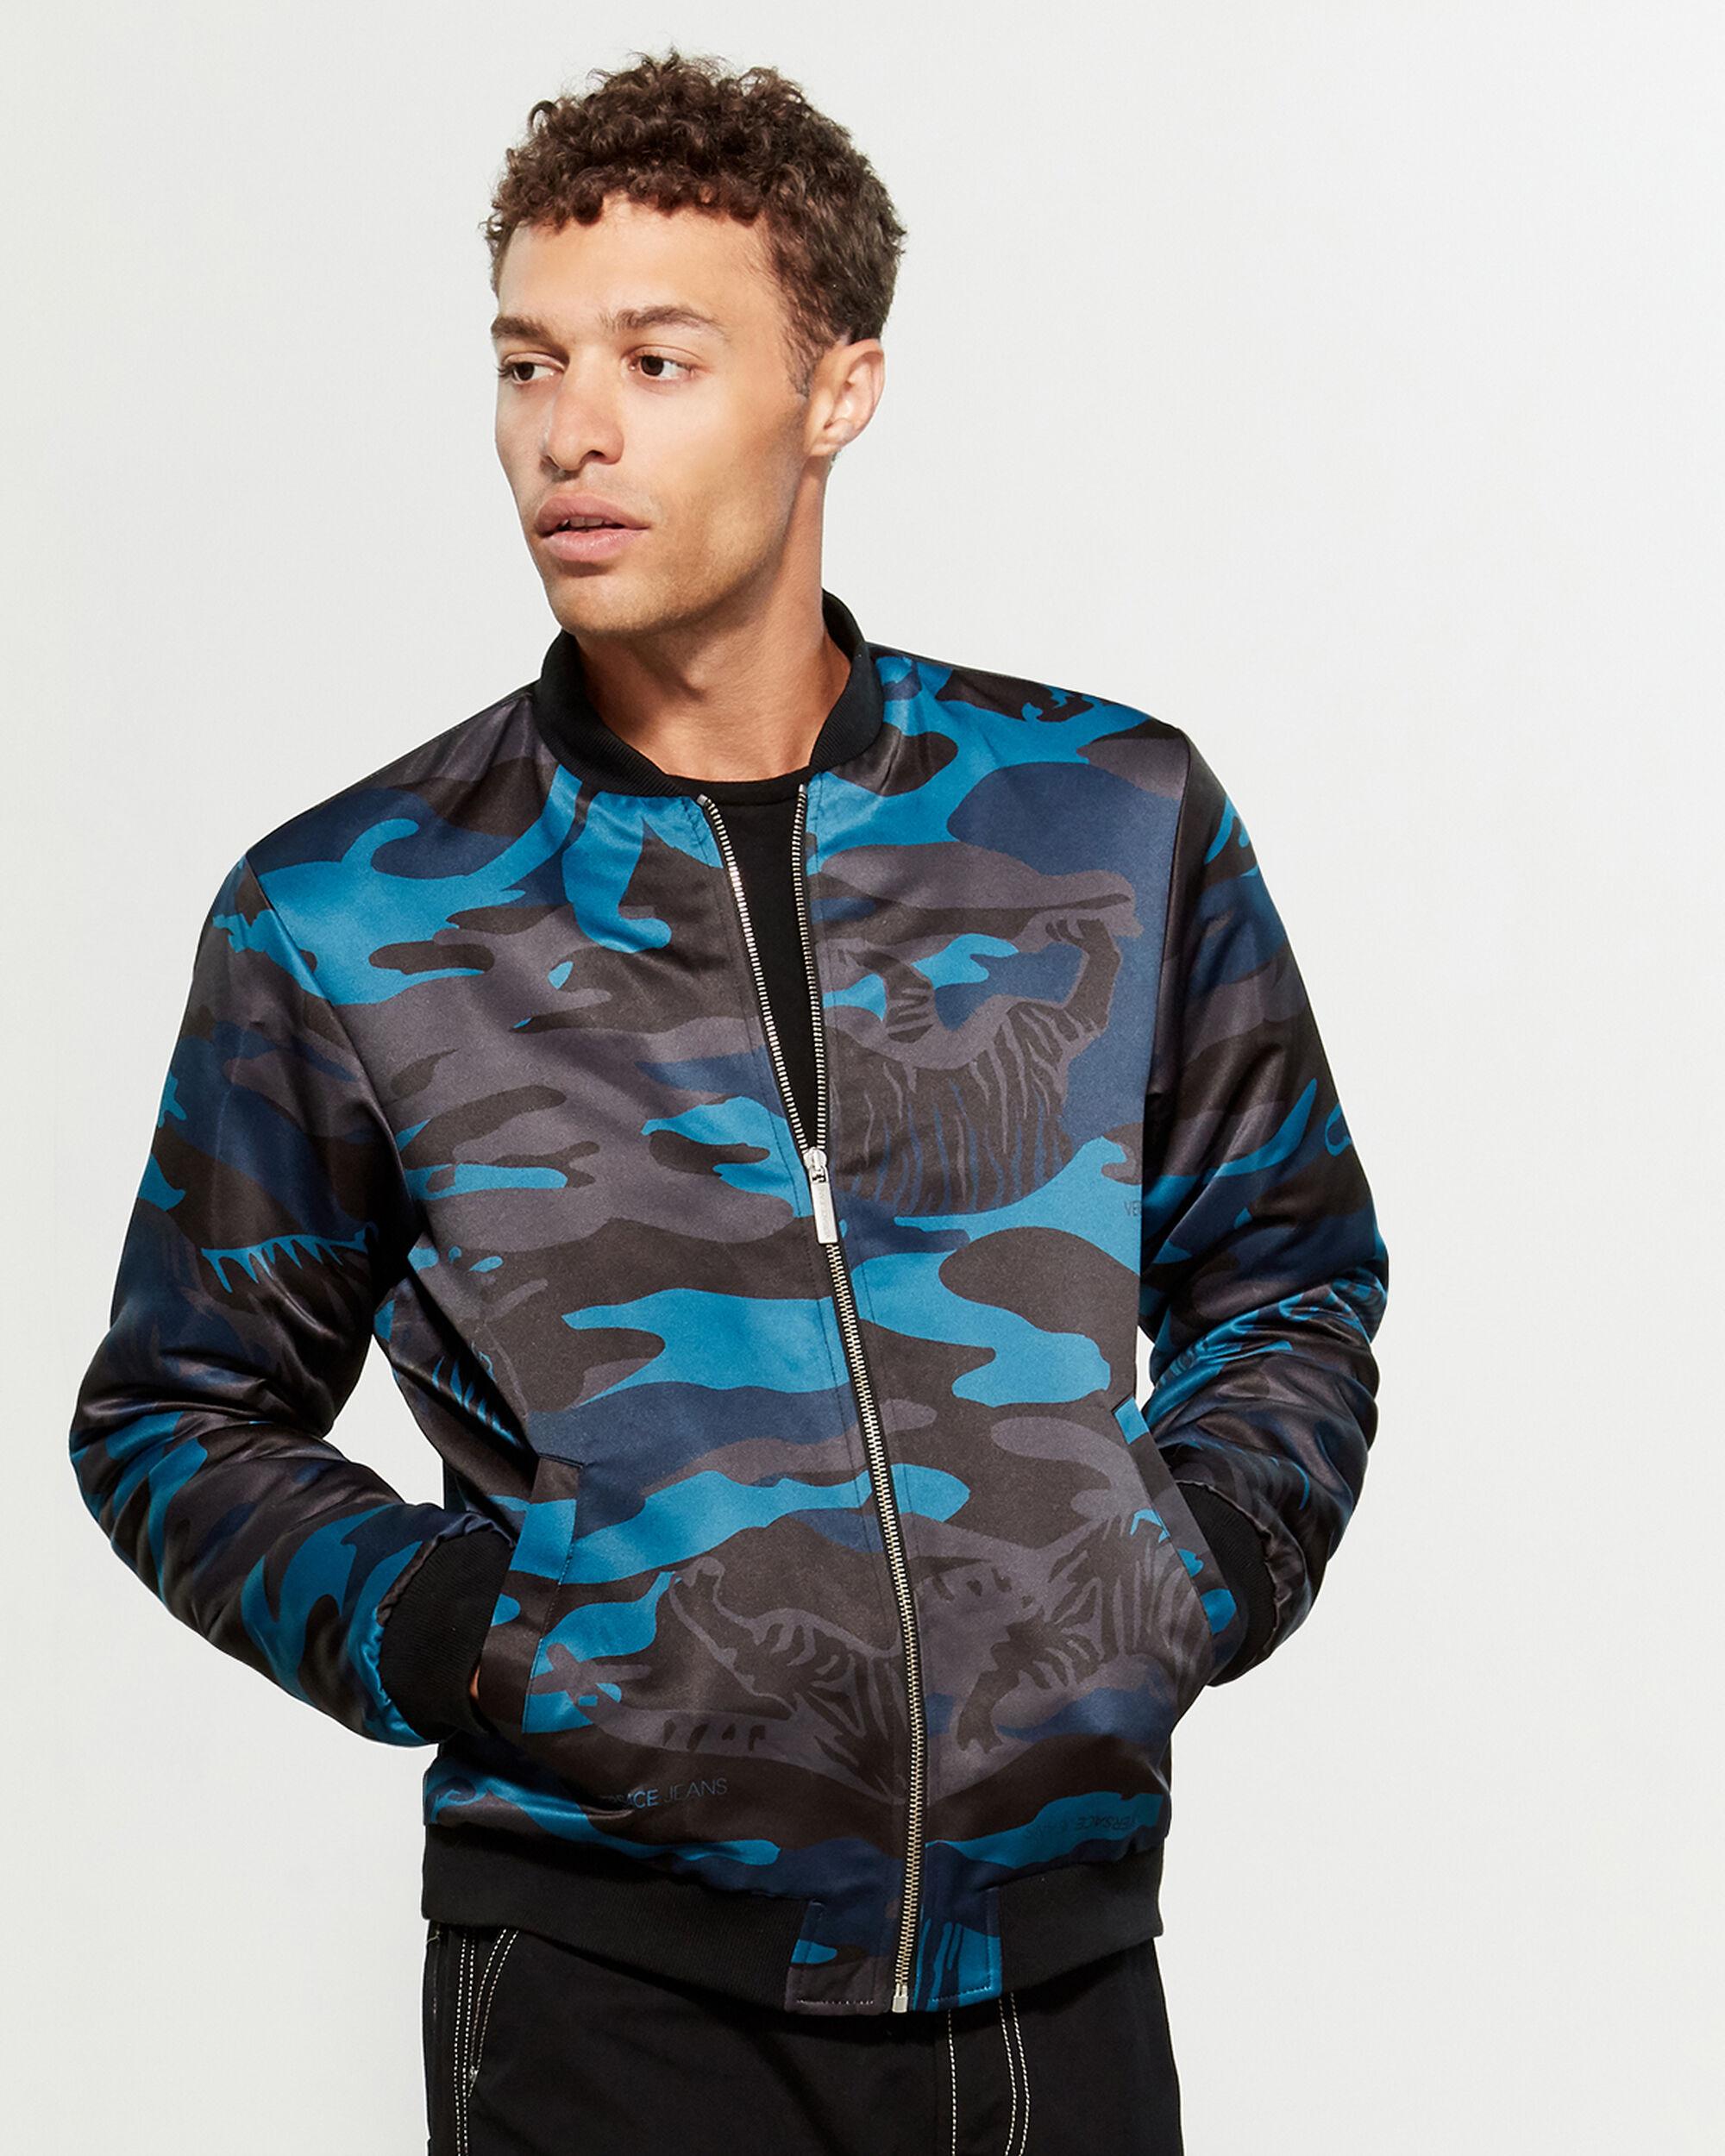 Versace Jeans Synthetic Camouflage Full-zip Bomber Jacket in Blue Camo ...